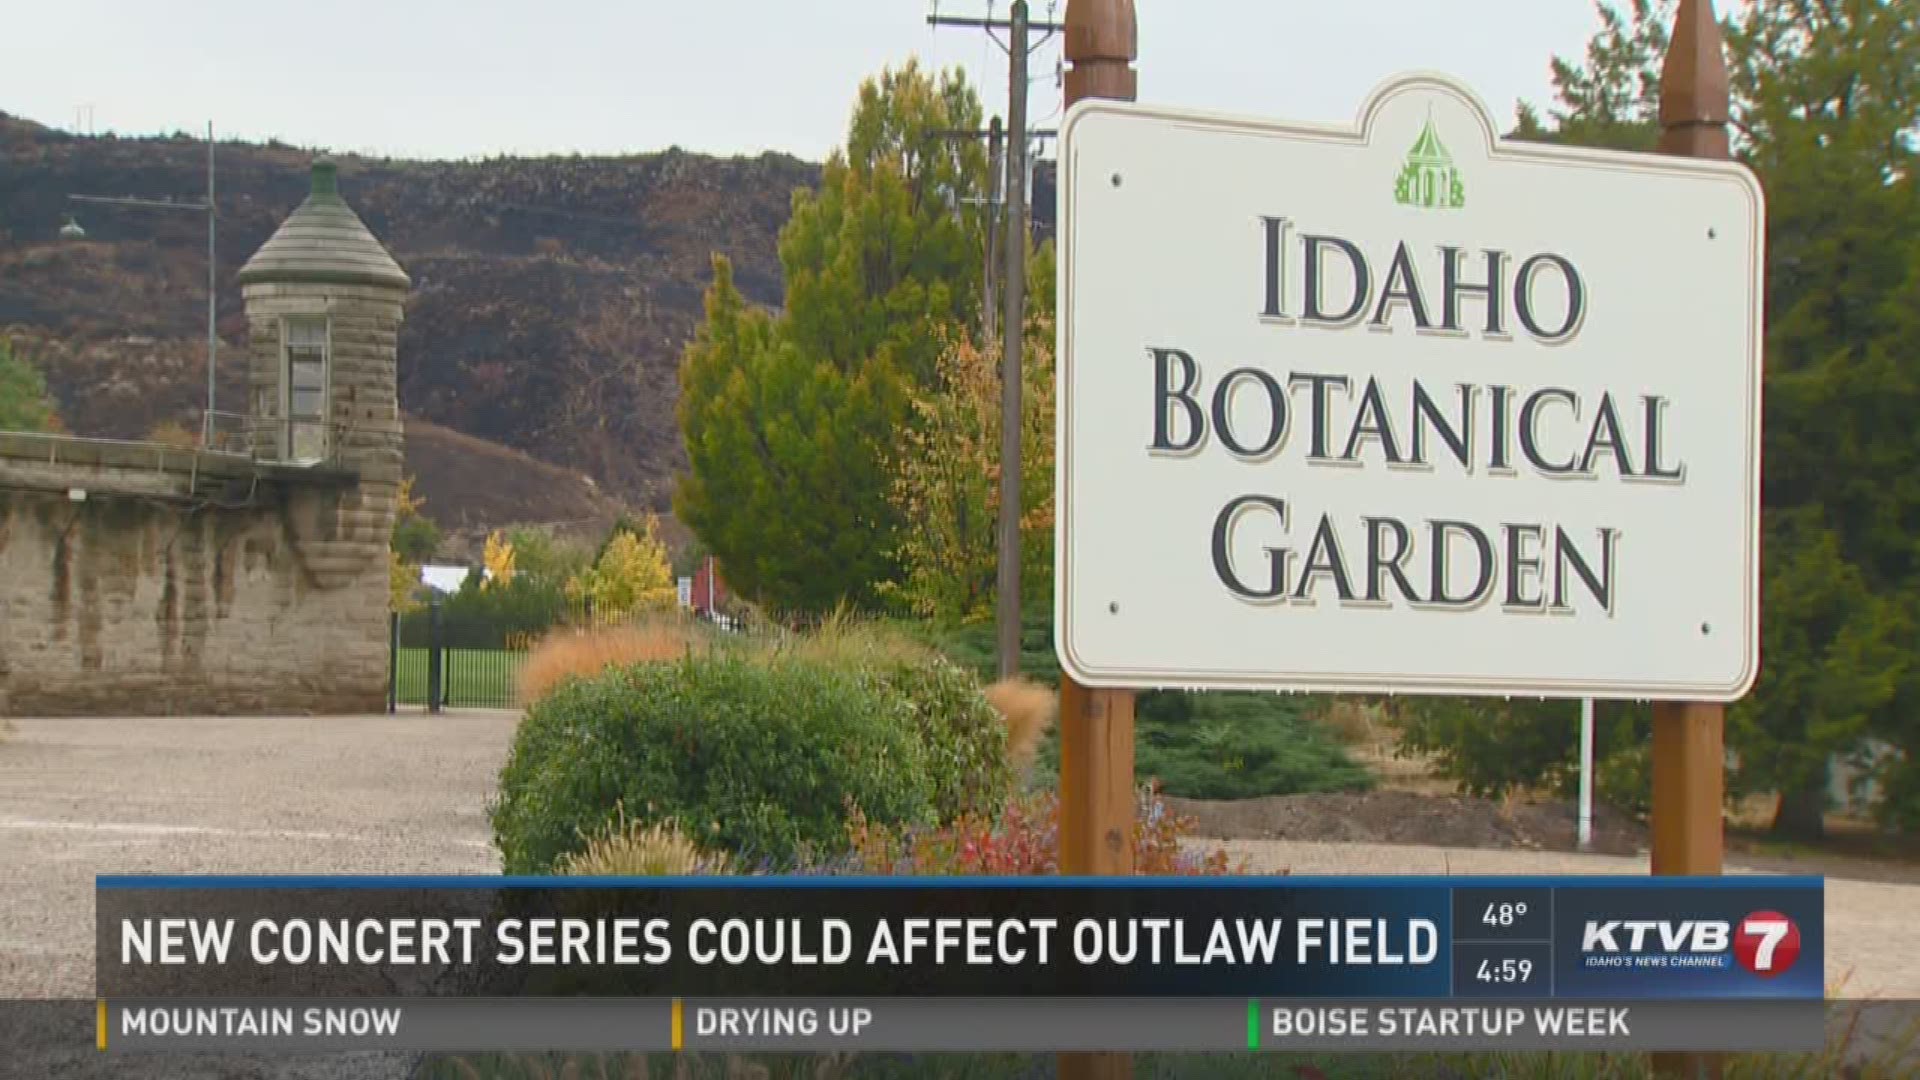 Idaho Botanical Garden Clashes With City Over Concert Series